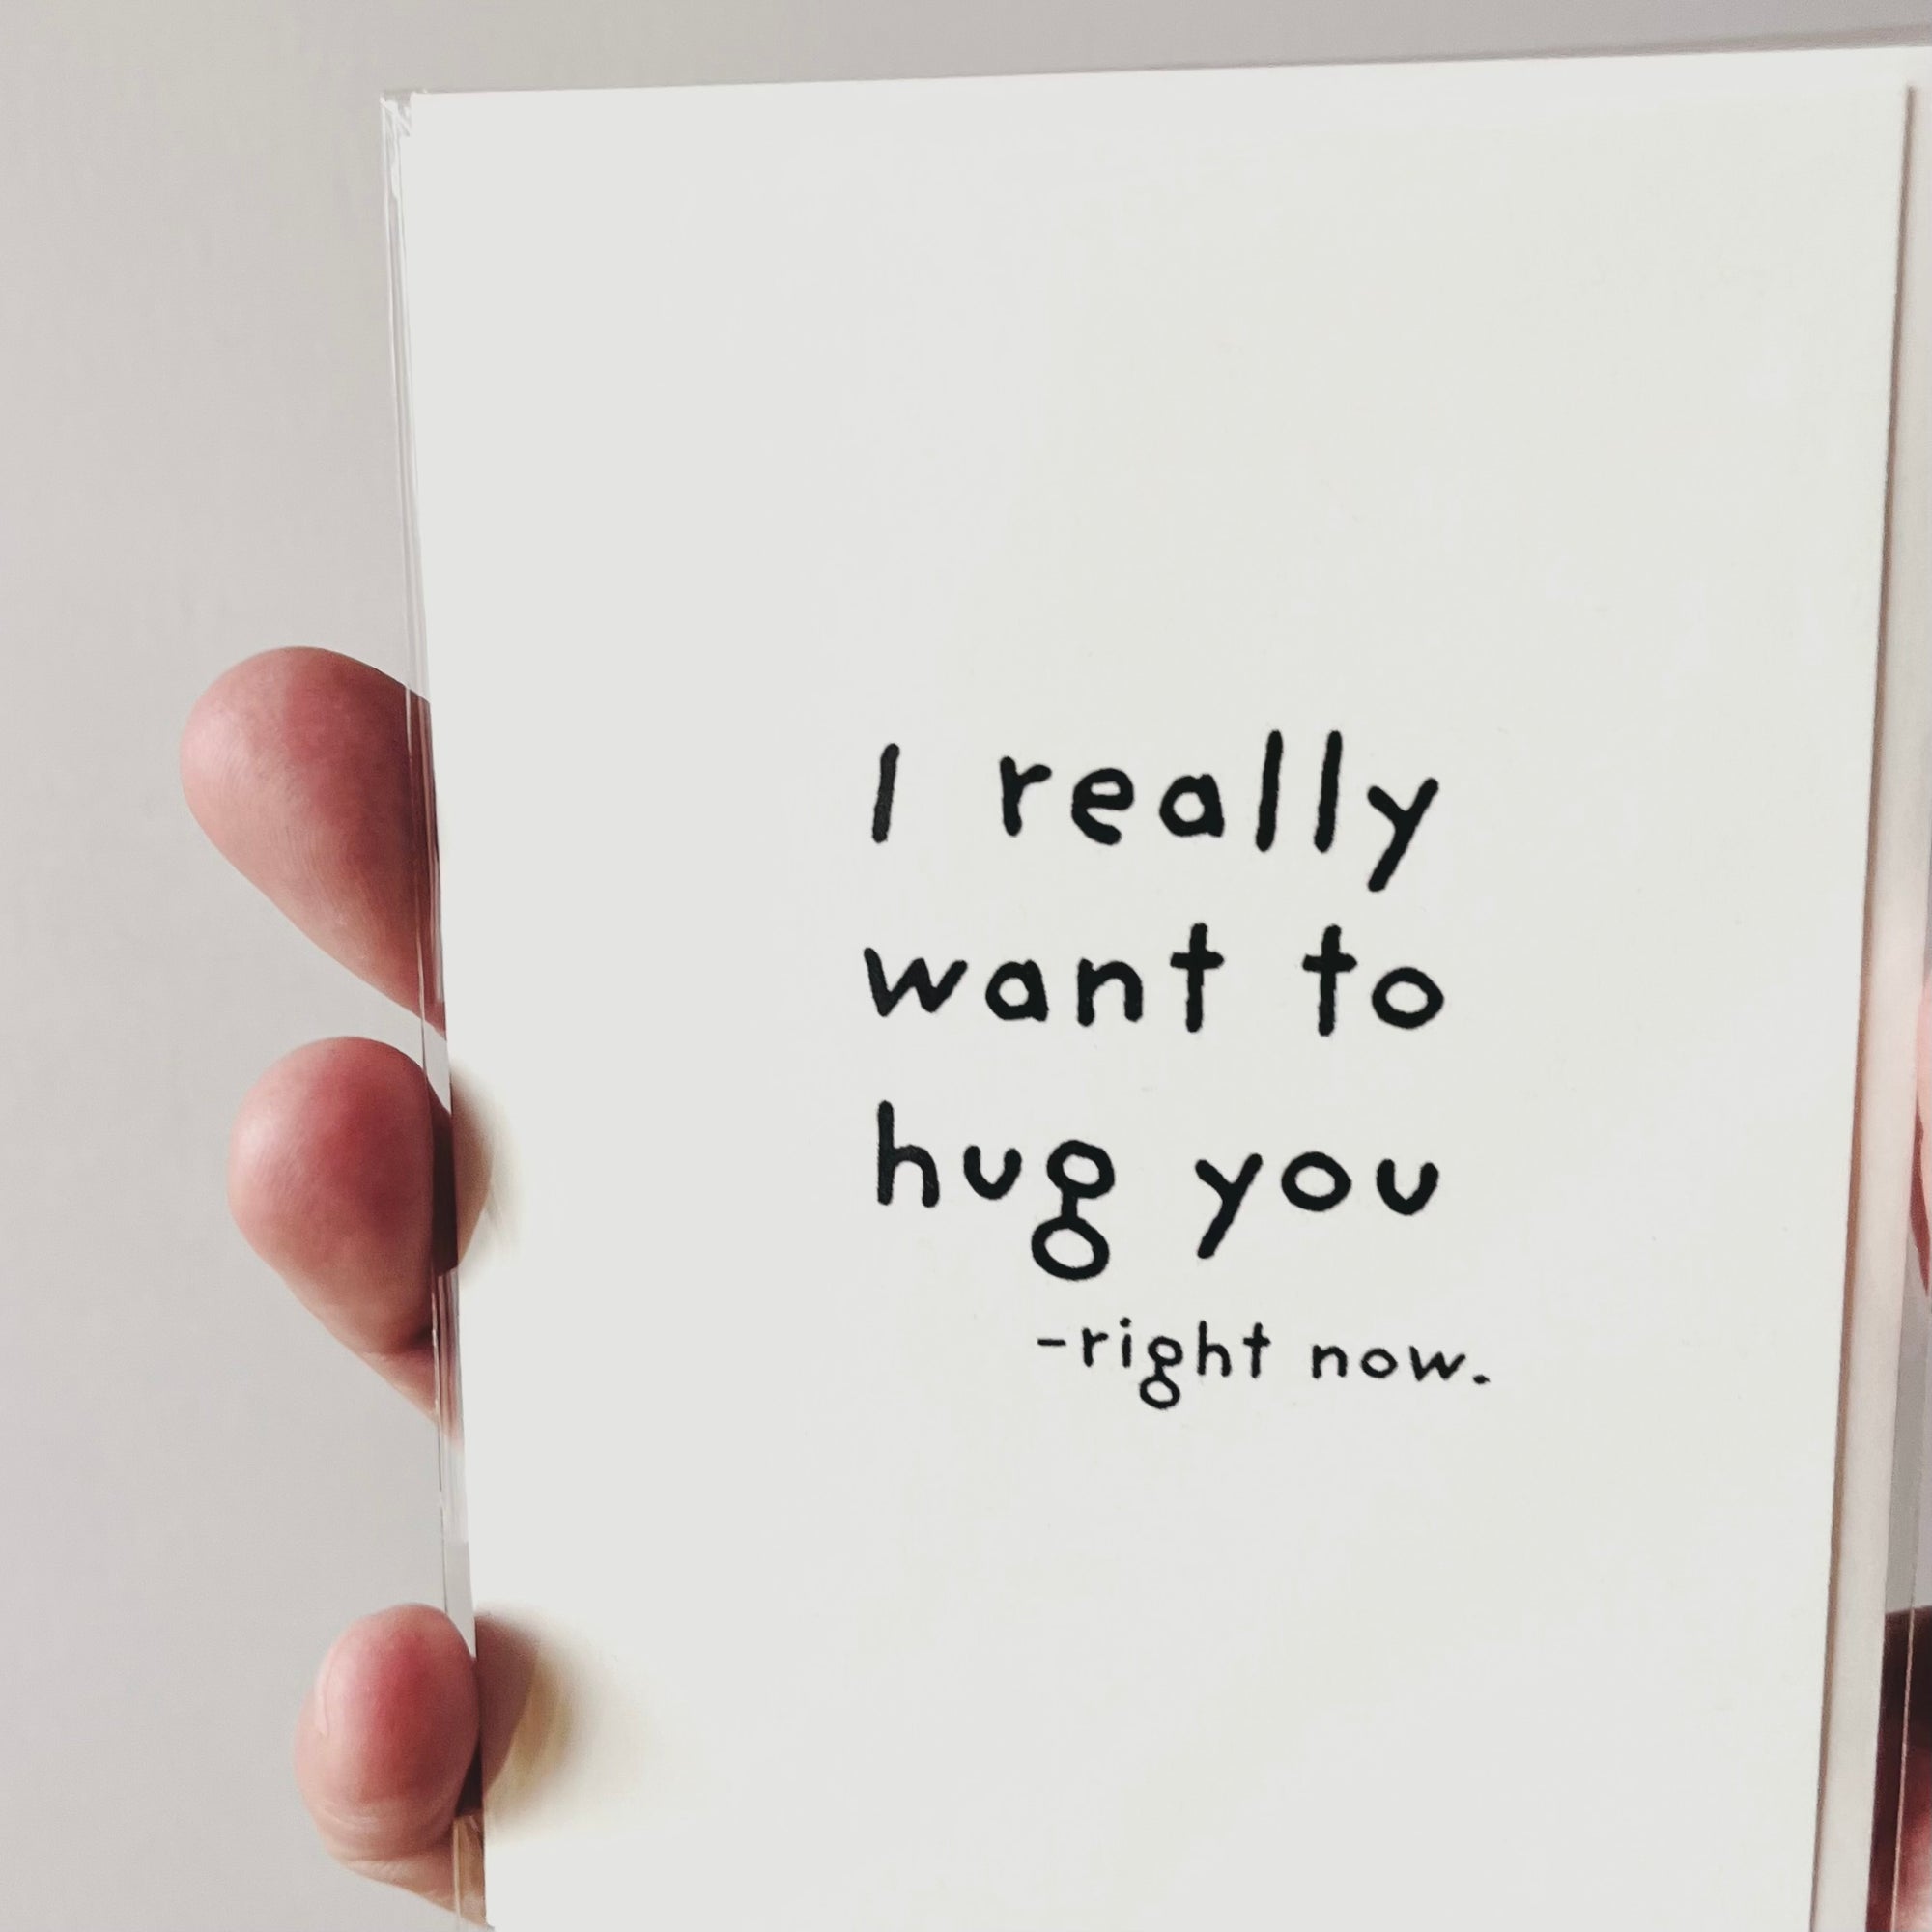 I really want to hug you - right now.